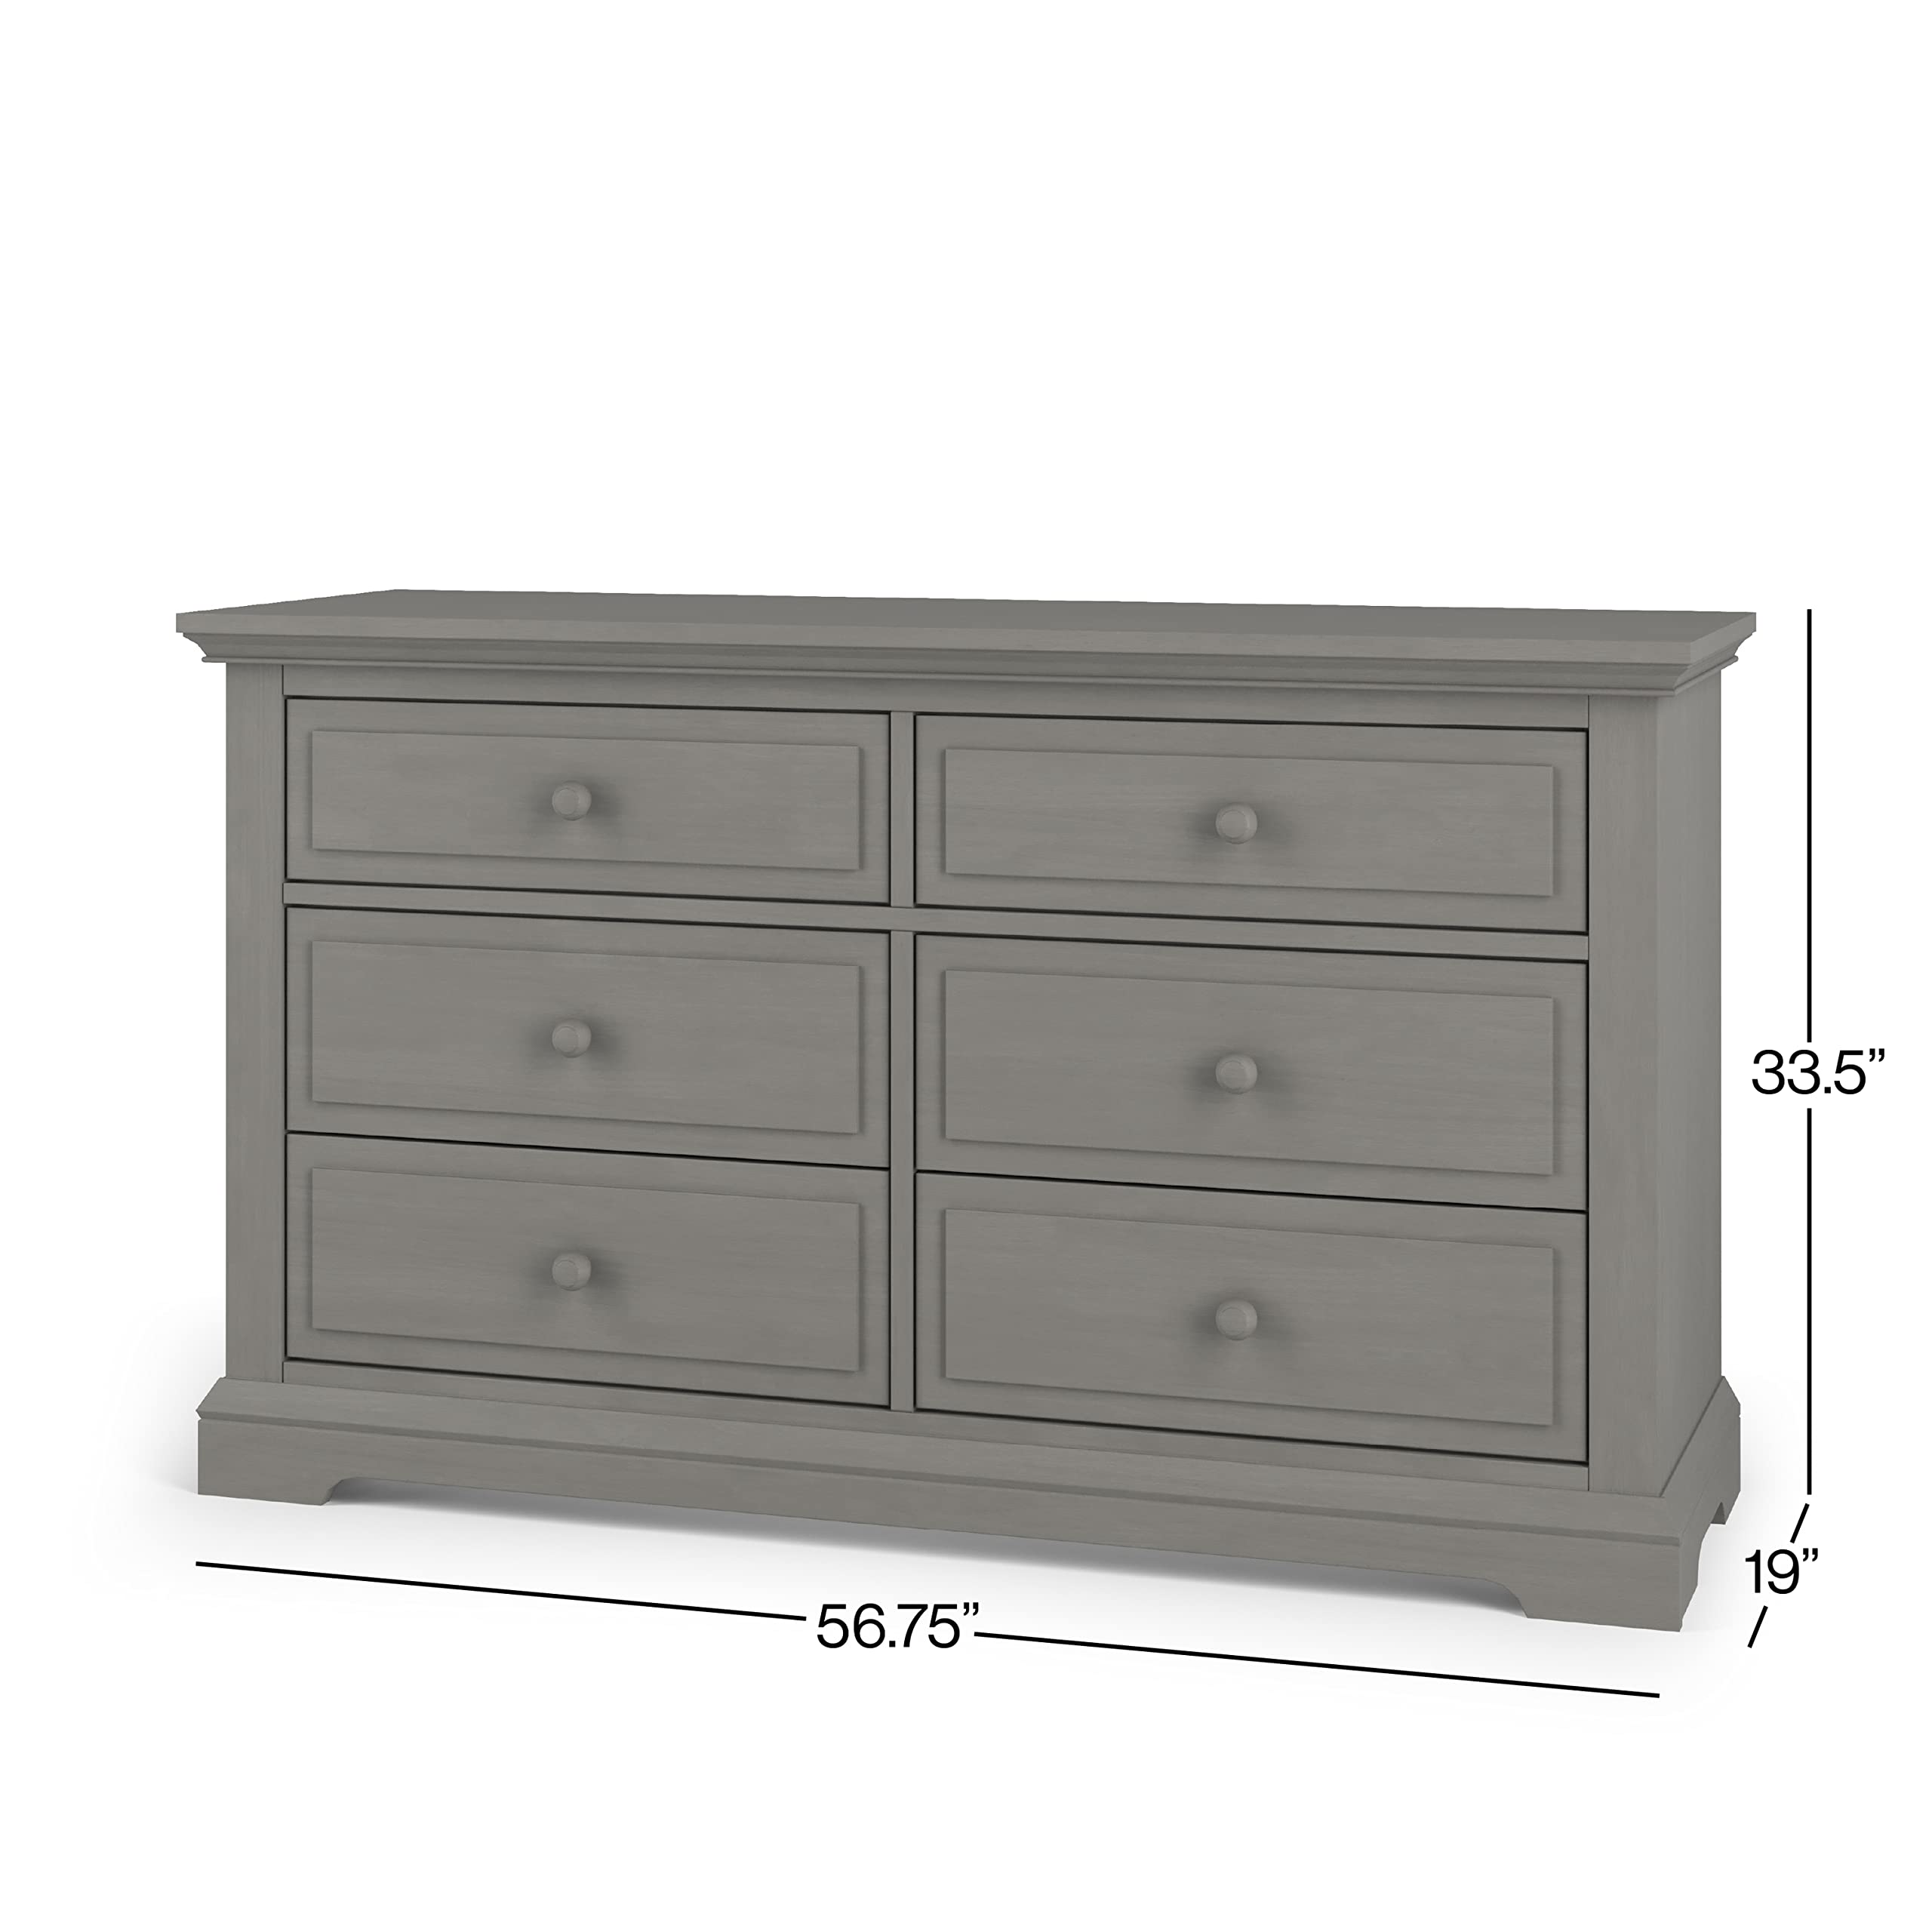 Child Craft Jordyn Select 6 Drawer Double Dresser, Classic Style with Wood Knobs (Lunar Gray)